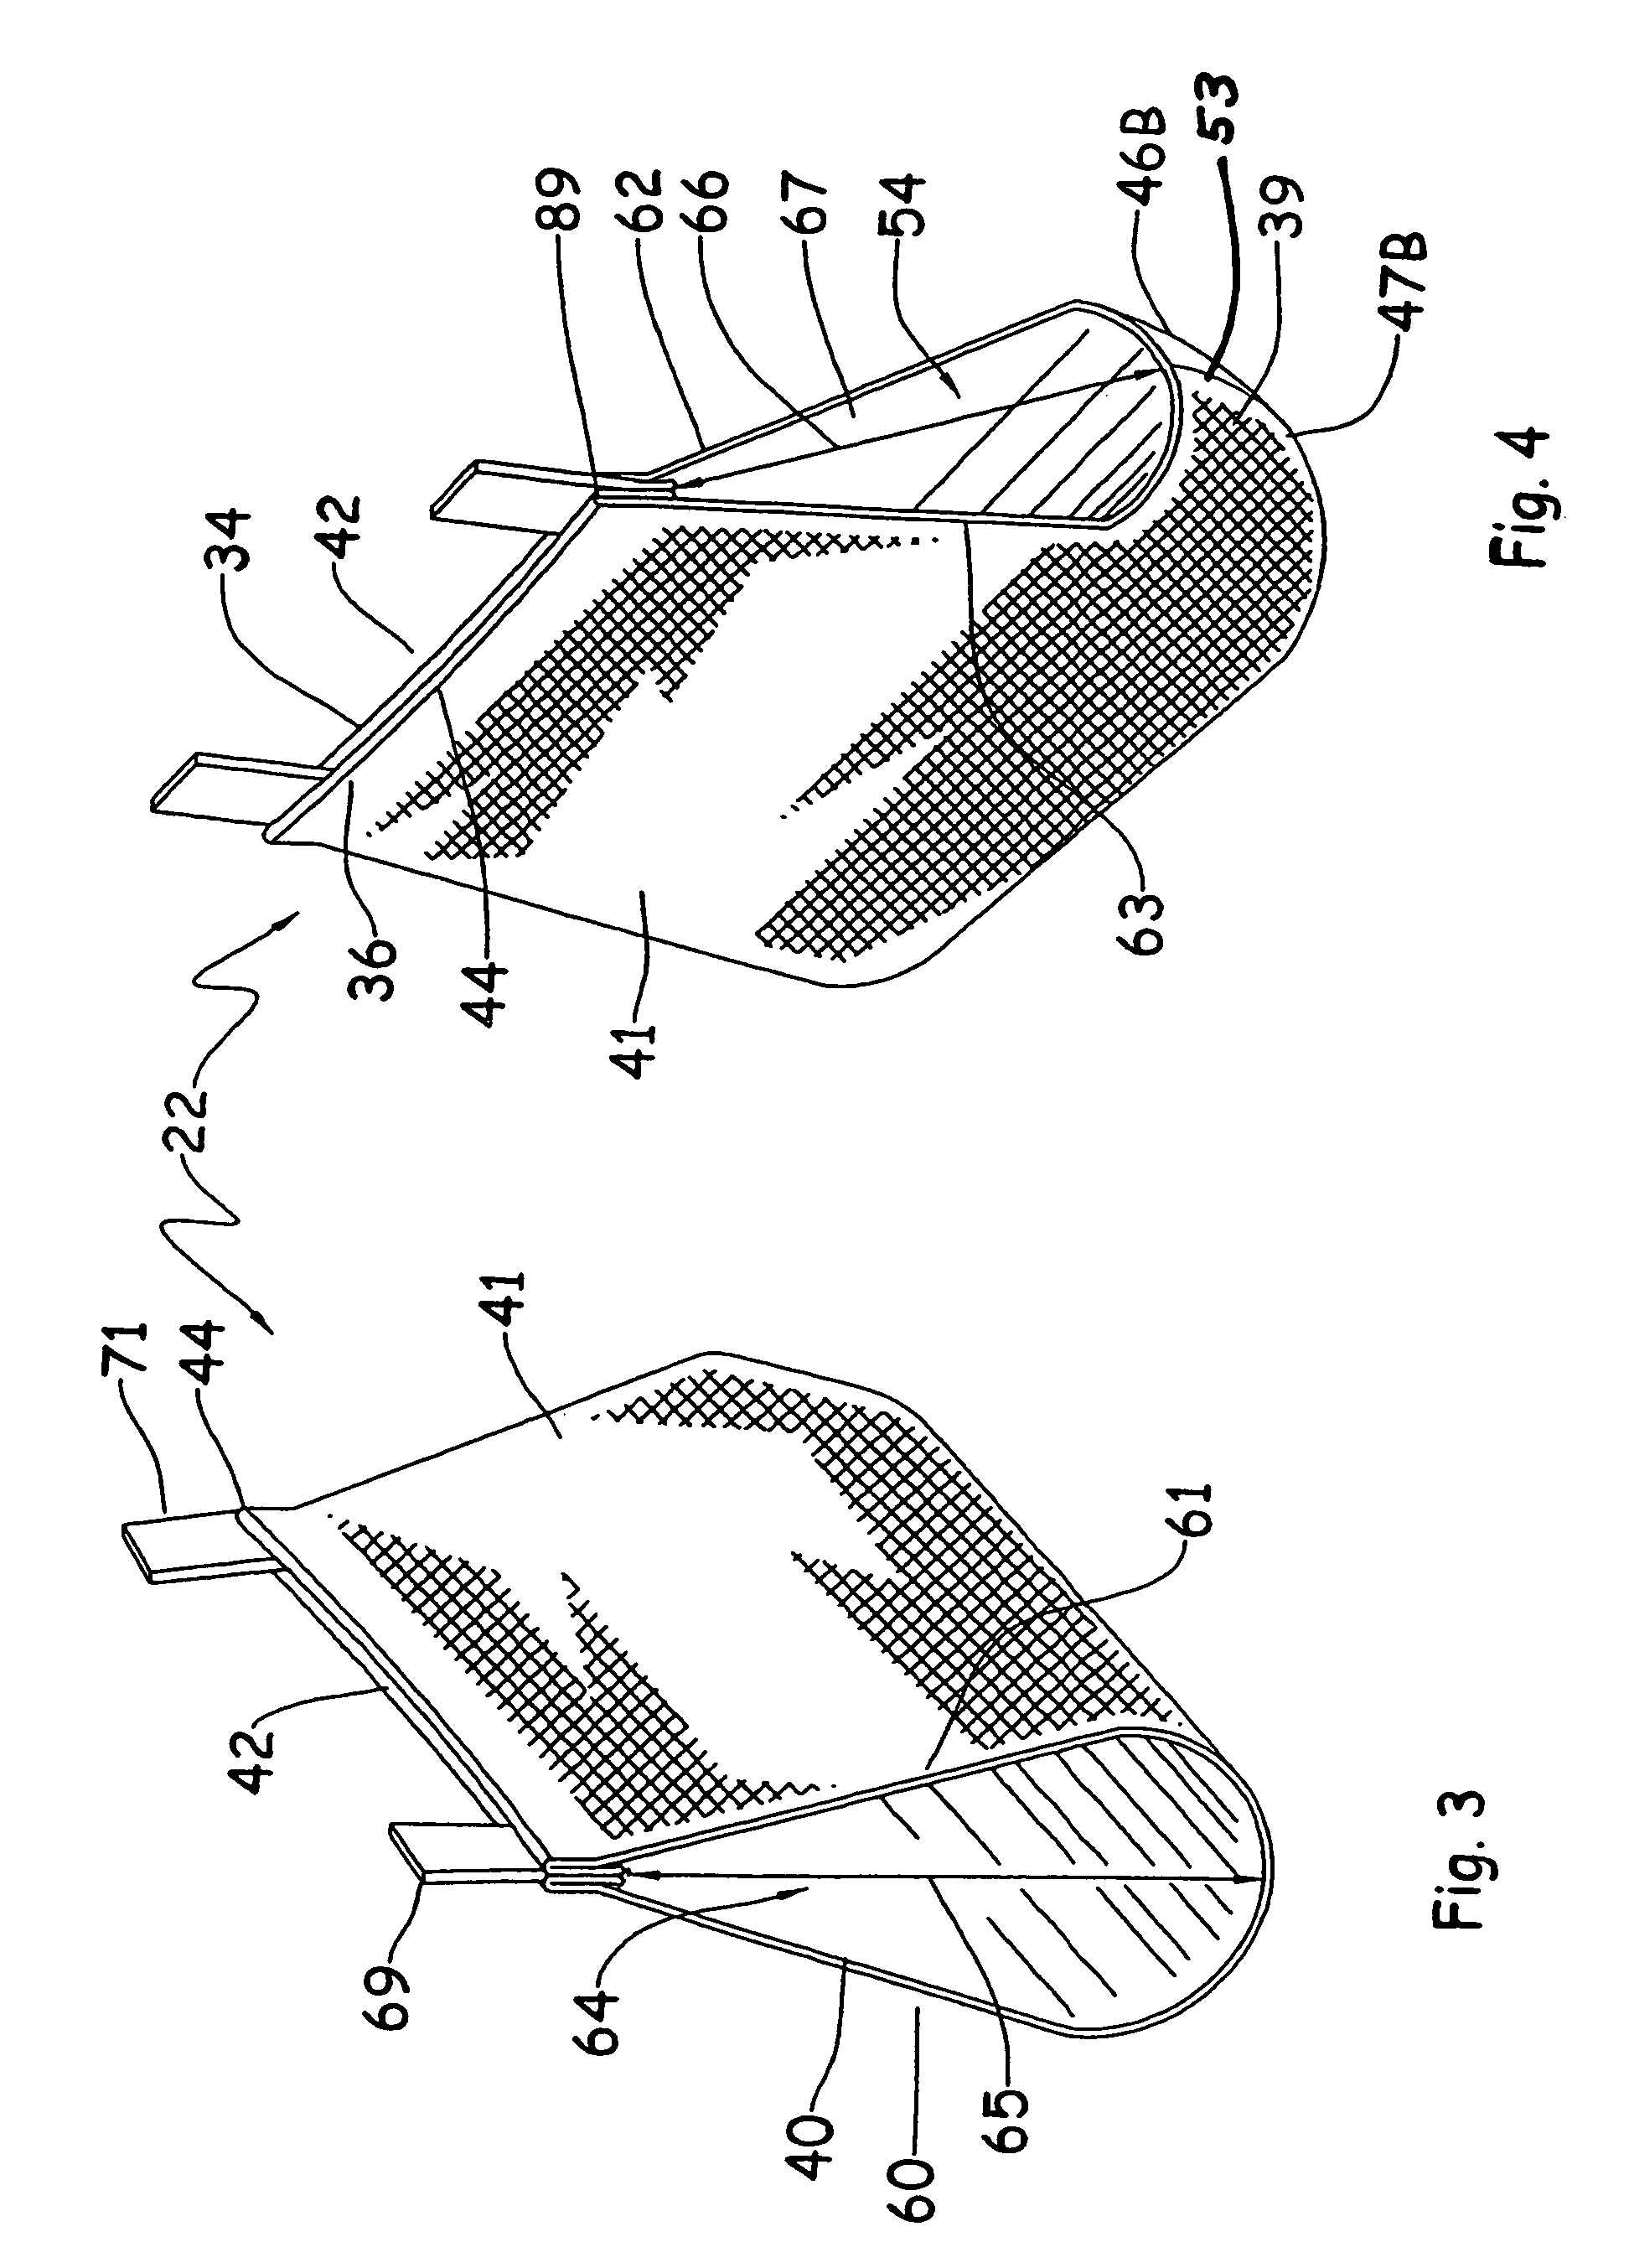 Arm sling and method of making